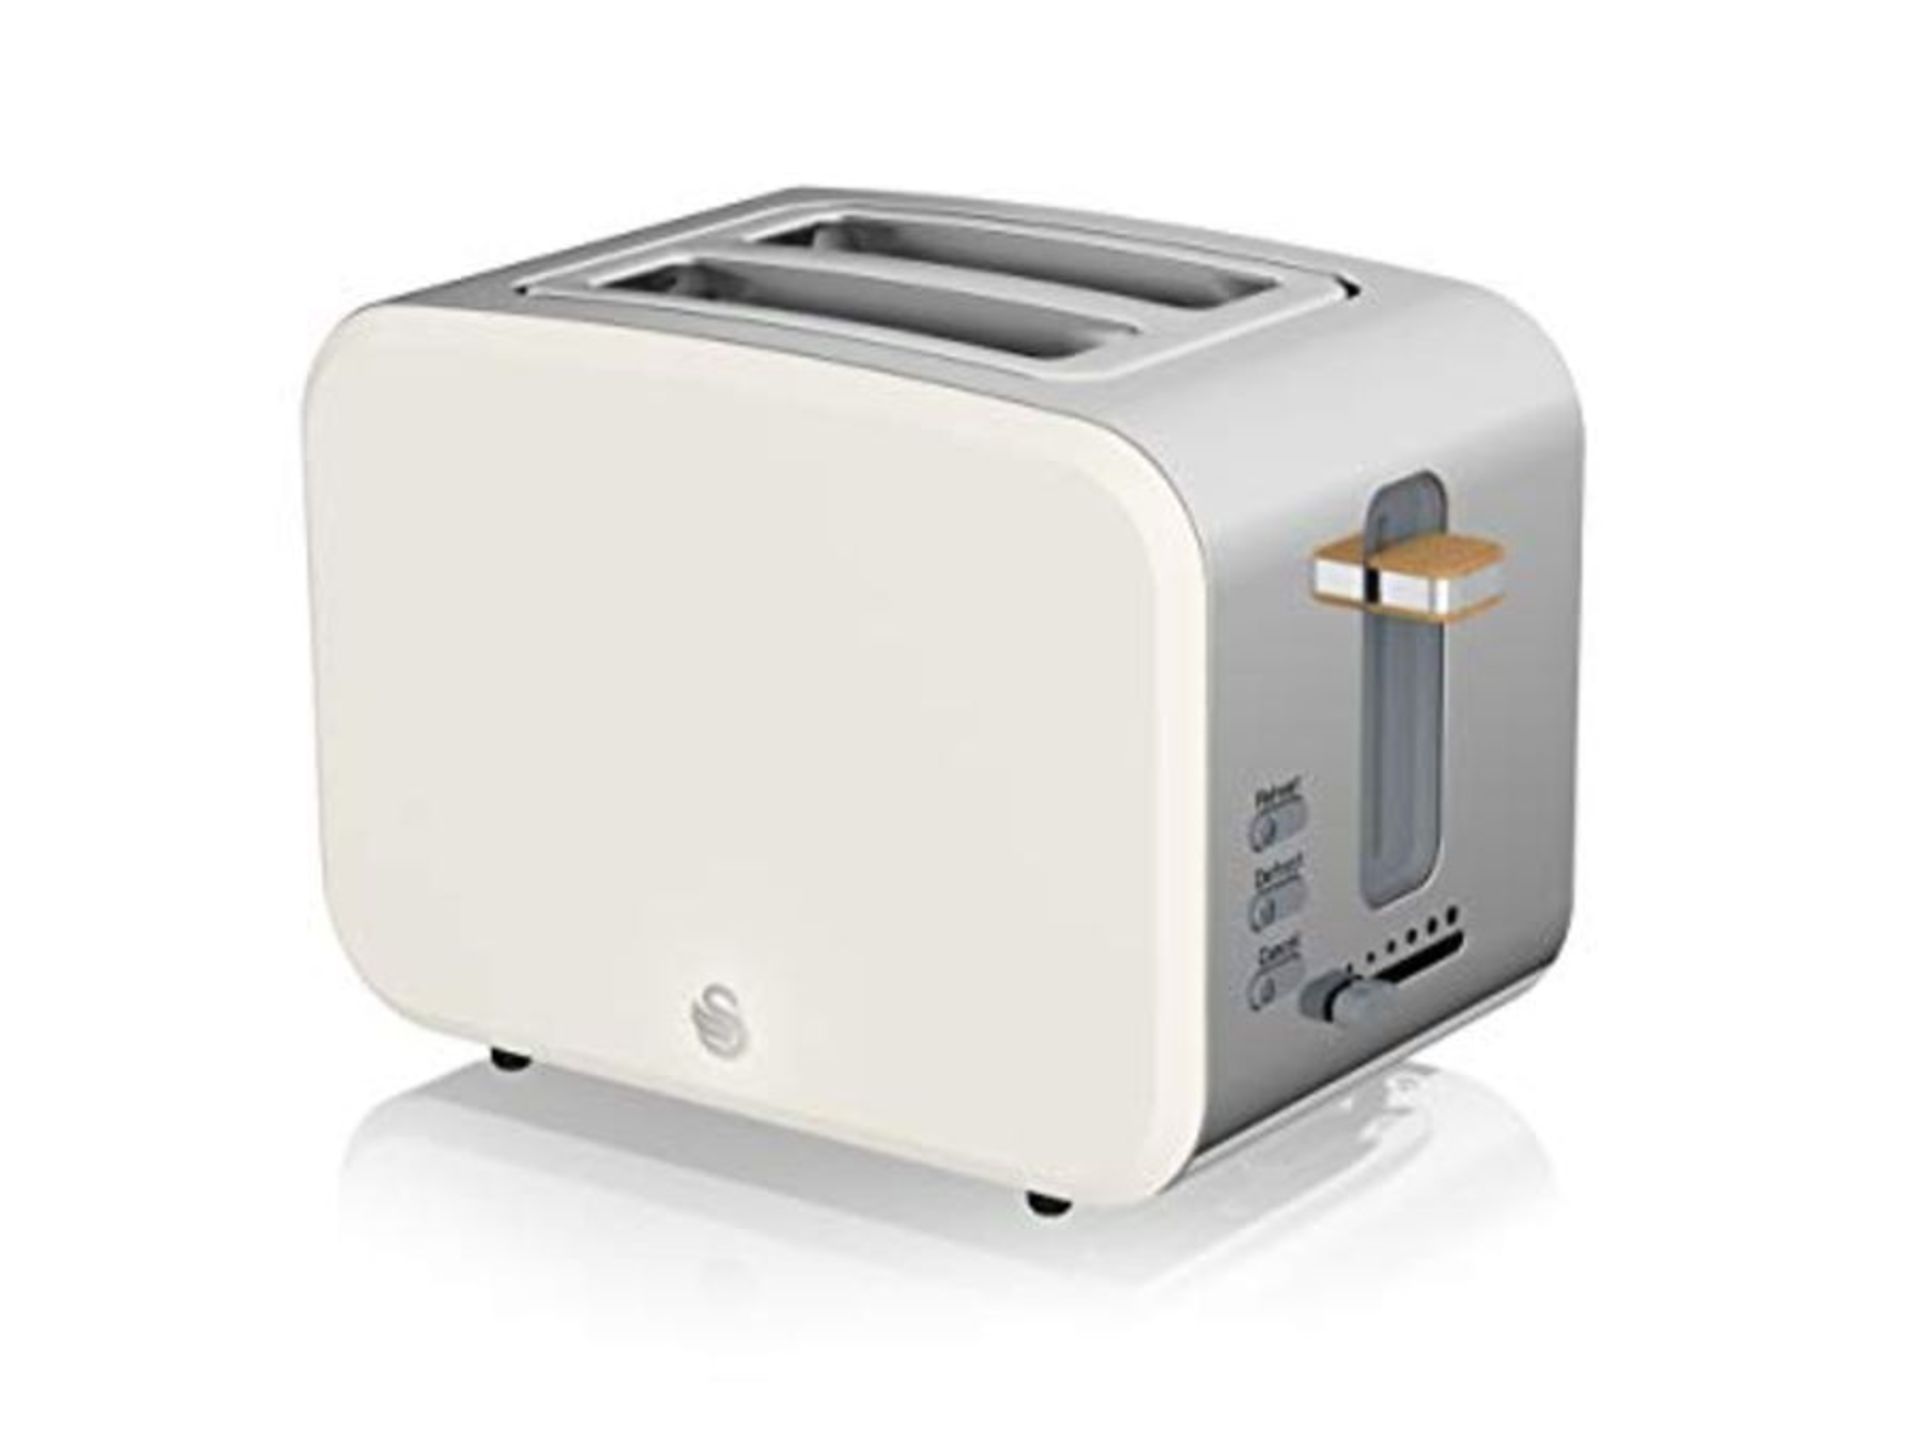 Swan Nordic Wide Slot Toaster with 2 Slices, 3 Functions, 6 Browning Levels, Modern De